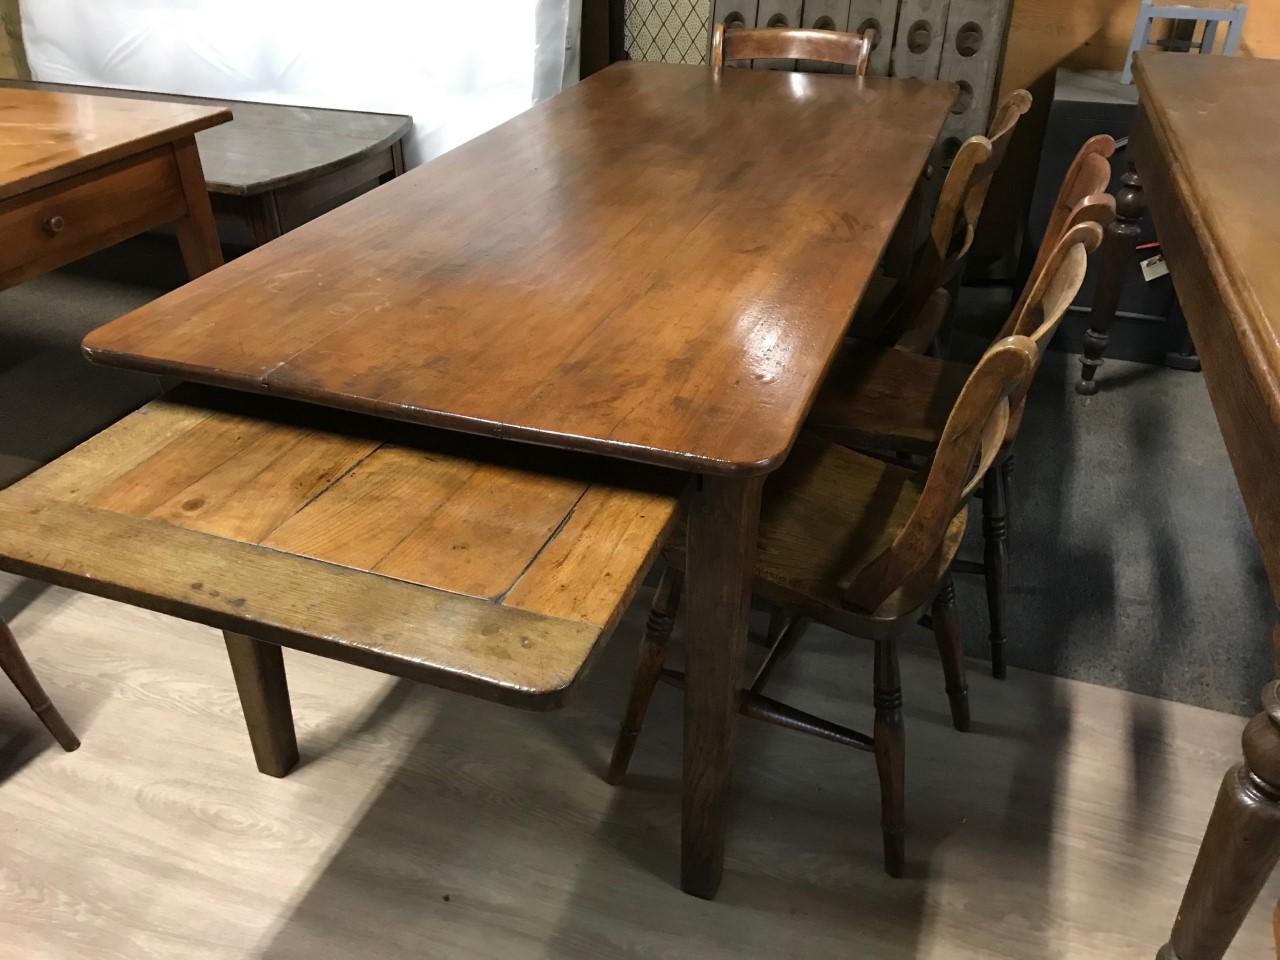 19th century cherry dining table with bread slide and one side drawer. The table has a beautiful top and sits on a sturdy base with tapered legs. Lovely warm cherry in color and stands really well.

 